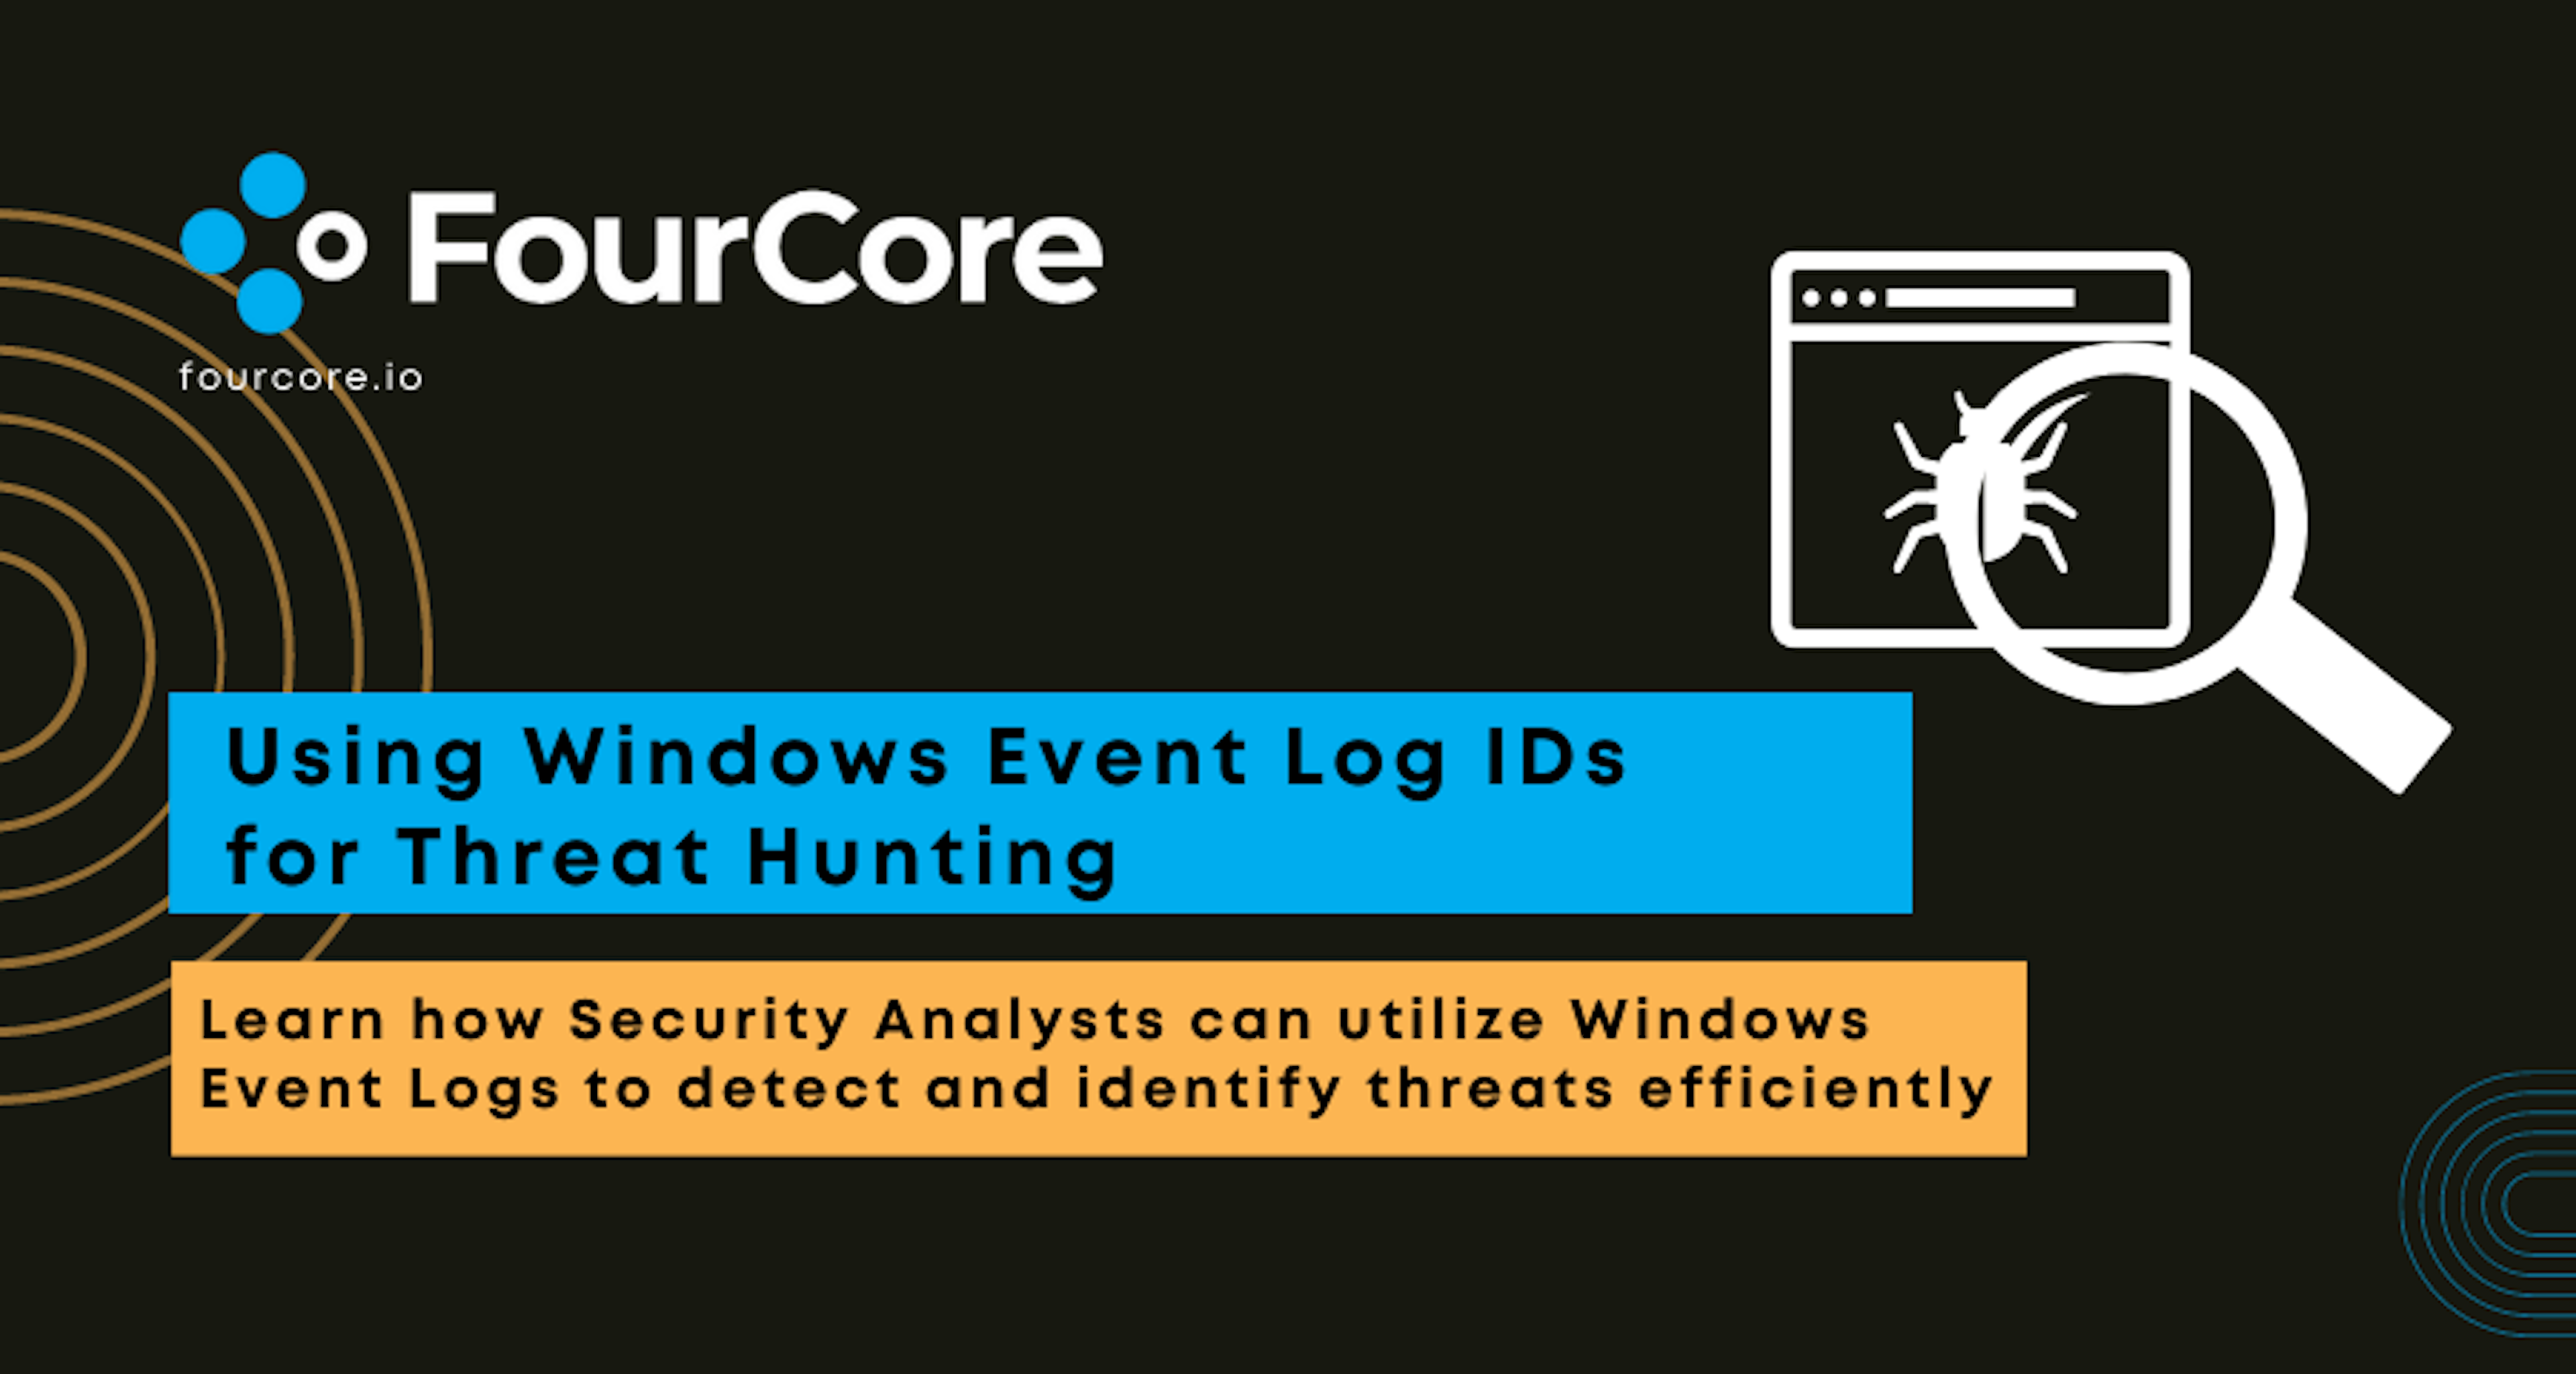 Using Windows Event Log IDs for Threat Hunting Blog Post Image